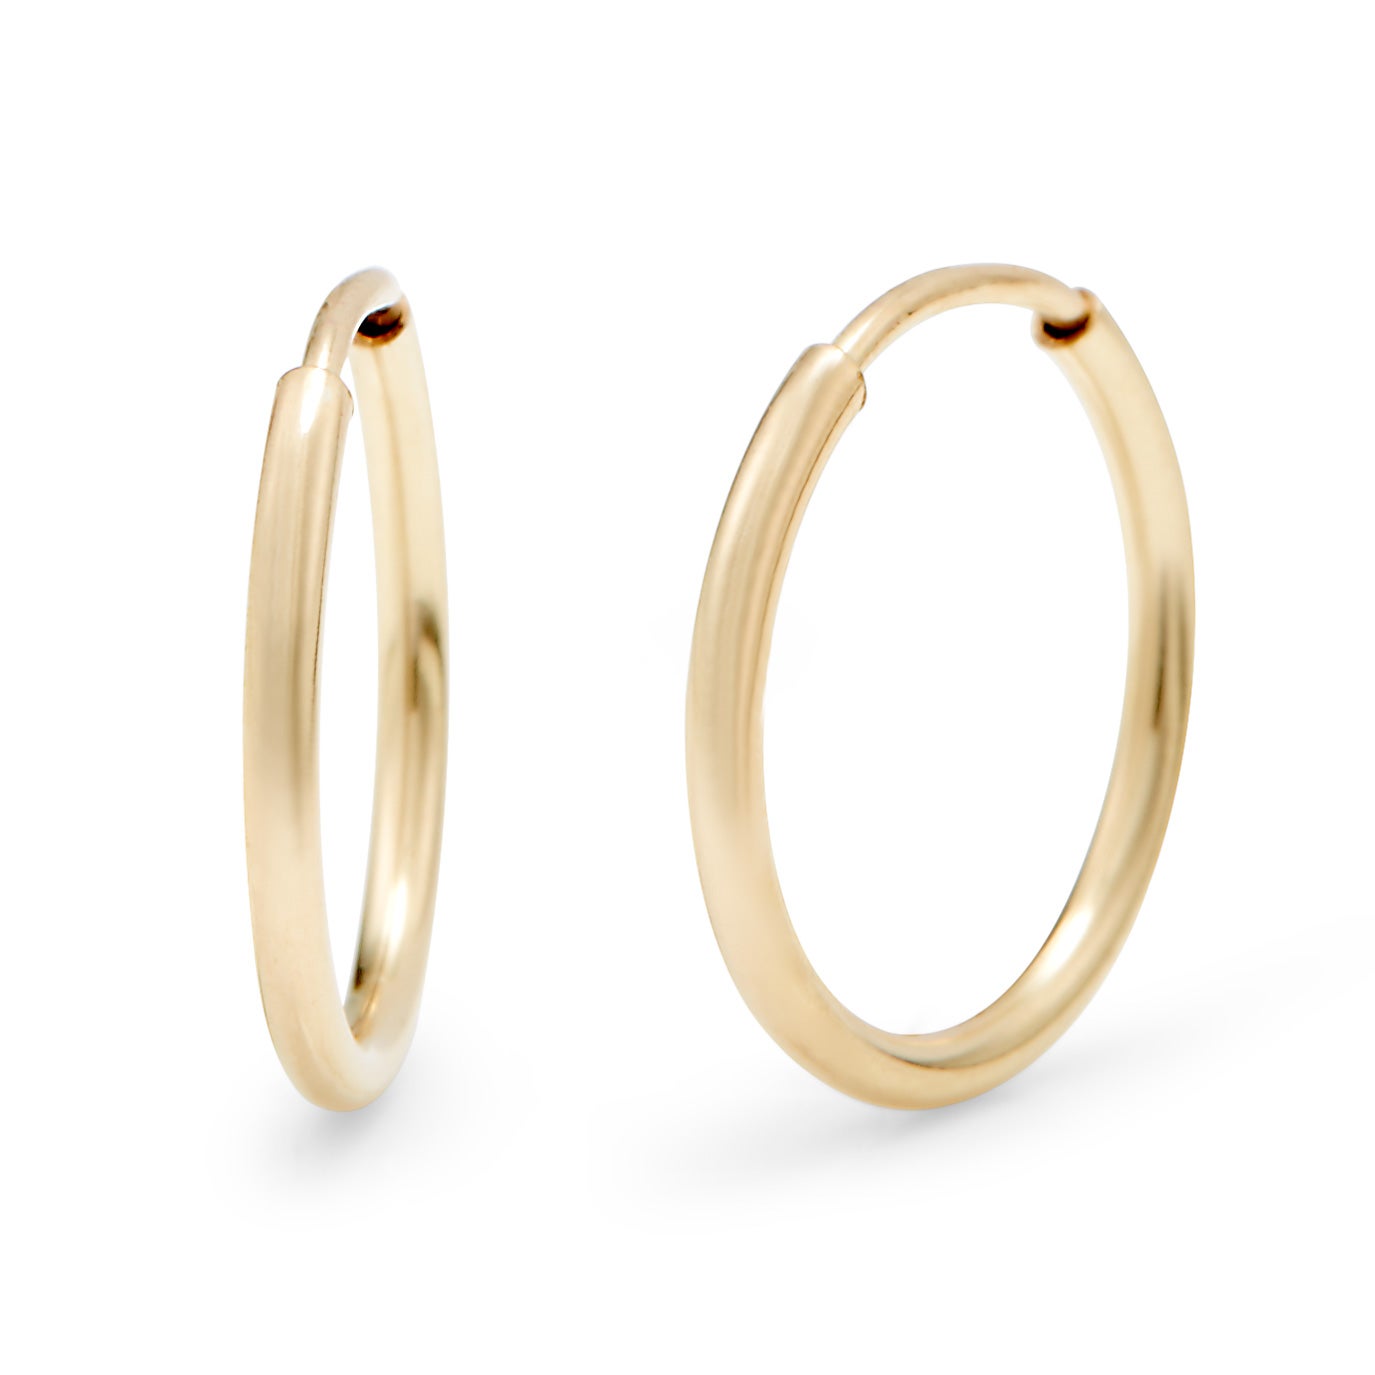 14K Gold Filled .5 Inch Hoop Earrings | Eve's Addiction®